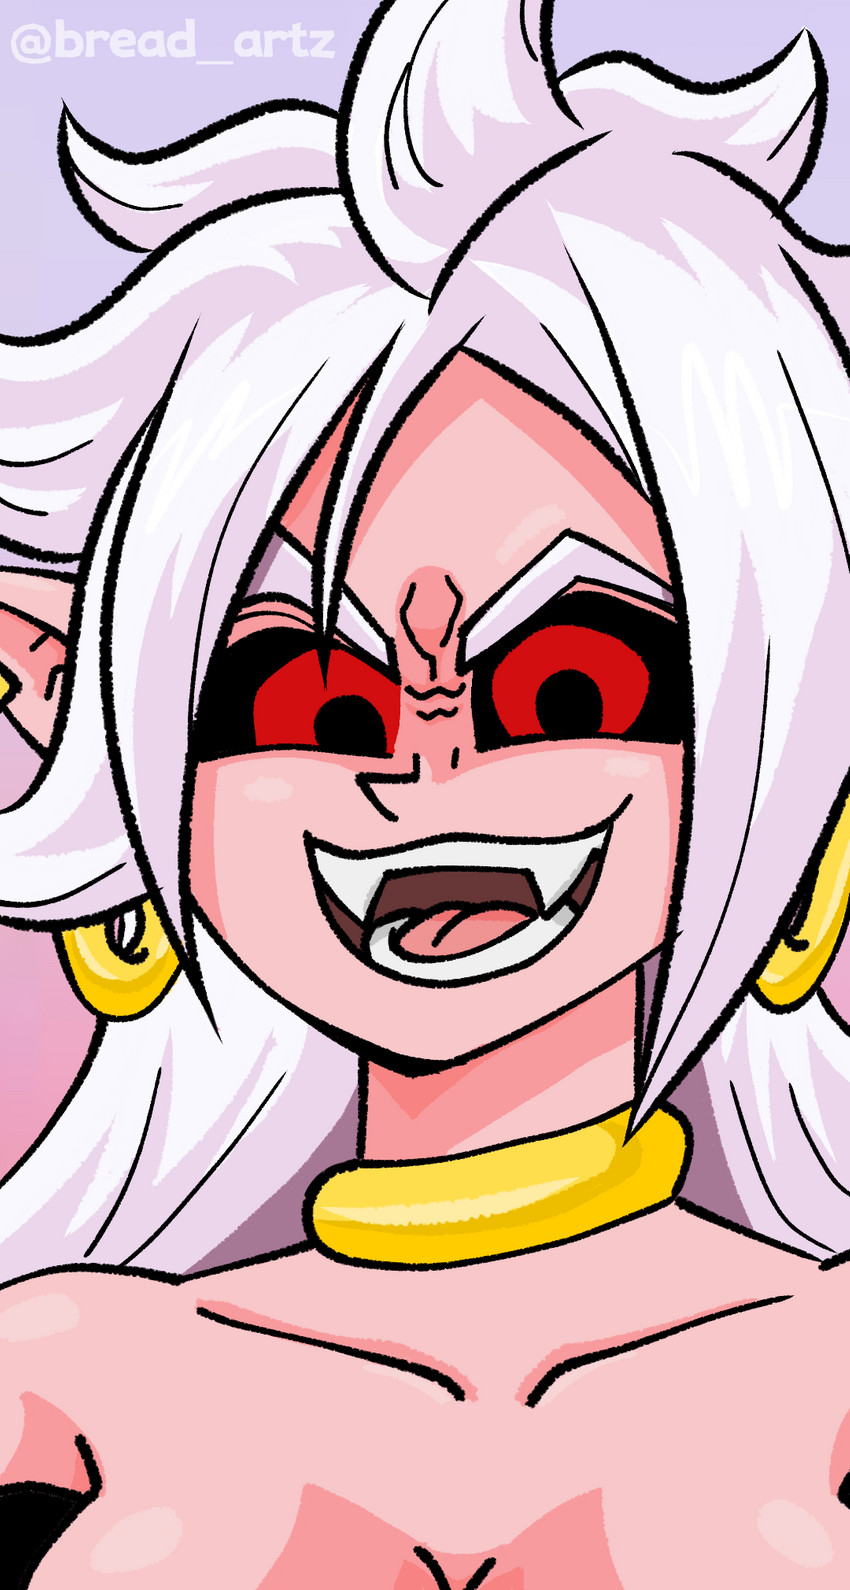 majin android 21 (dragon ball fighterz and etc) created by sozokuu